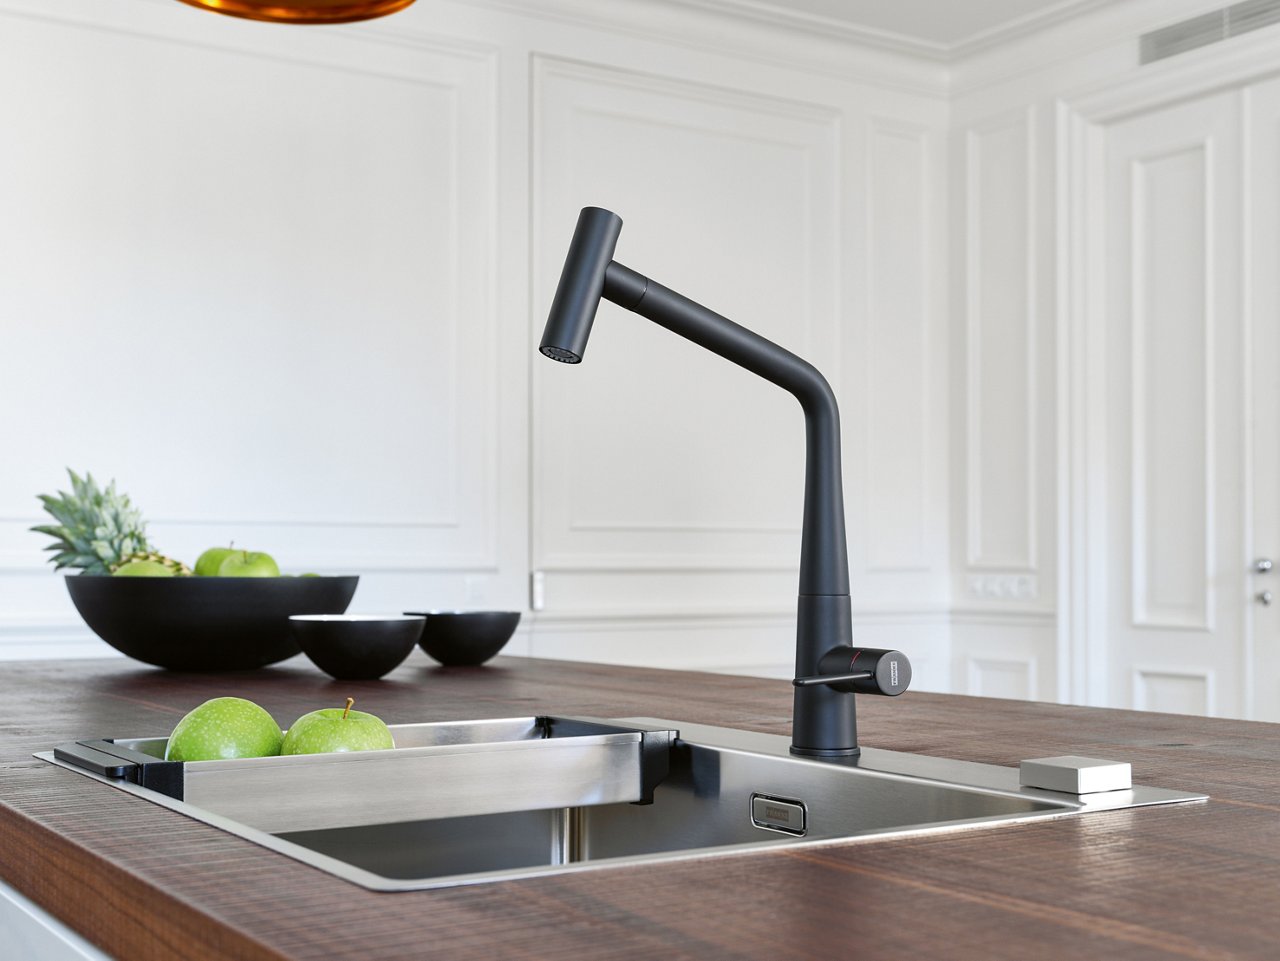 Franke Icon Matte Black pull out kitchen faucet in paired with a stainless steel sink in a contemporary kitchen feature dark wood counters. Sink has a colander with apples 